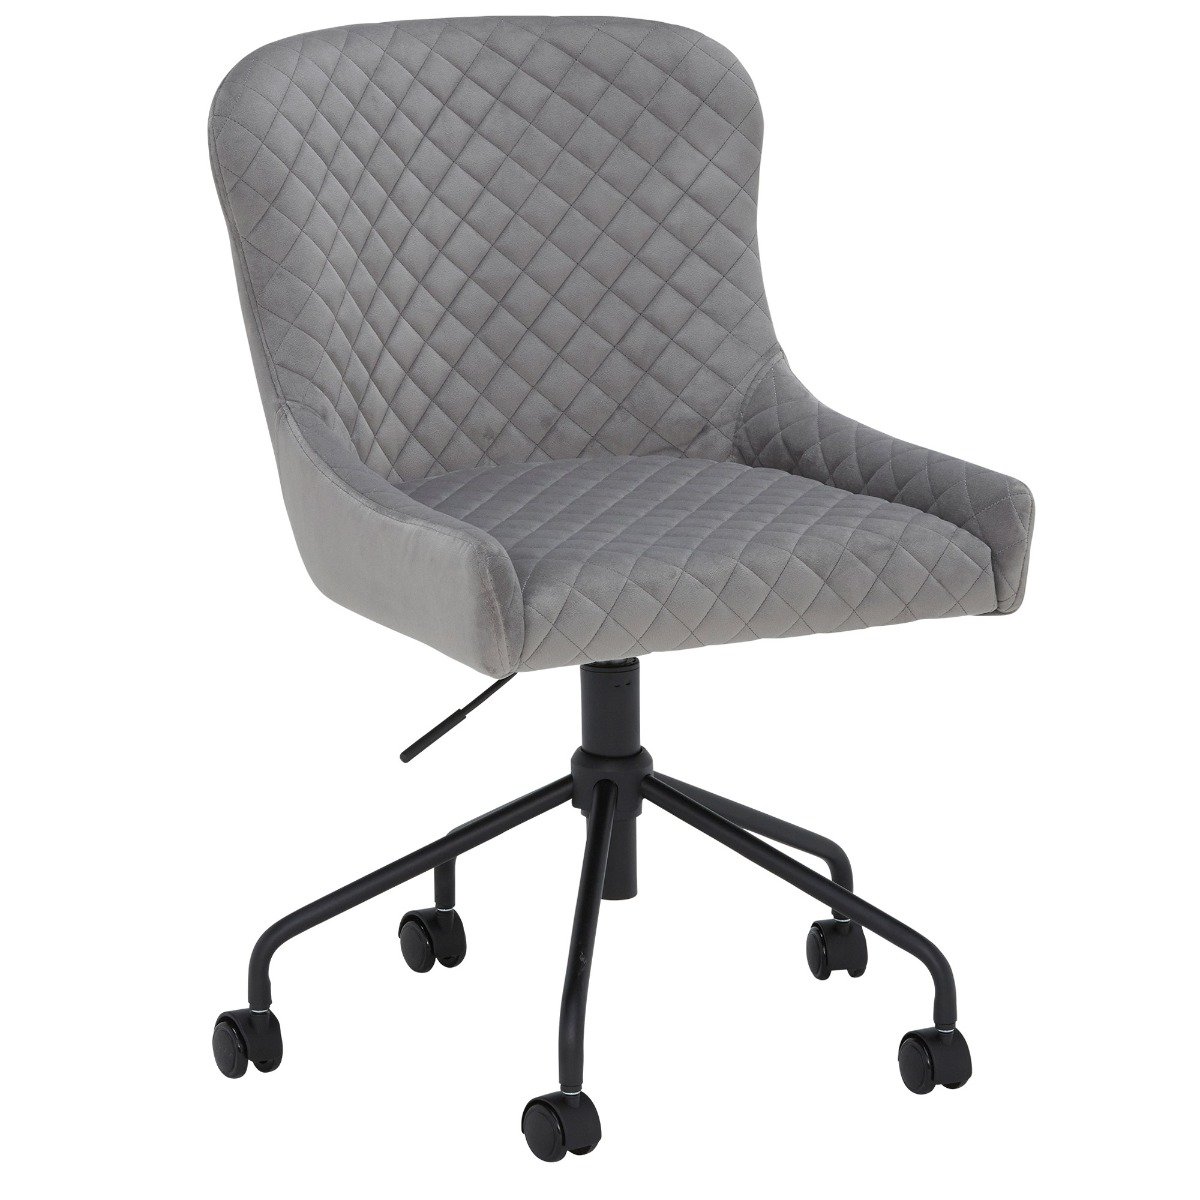 Rivington Occasional Work Office Chair, Grey | Barker & Stonehouse